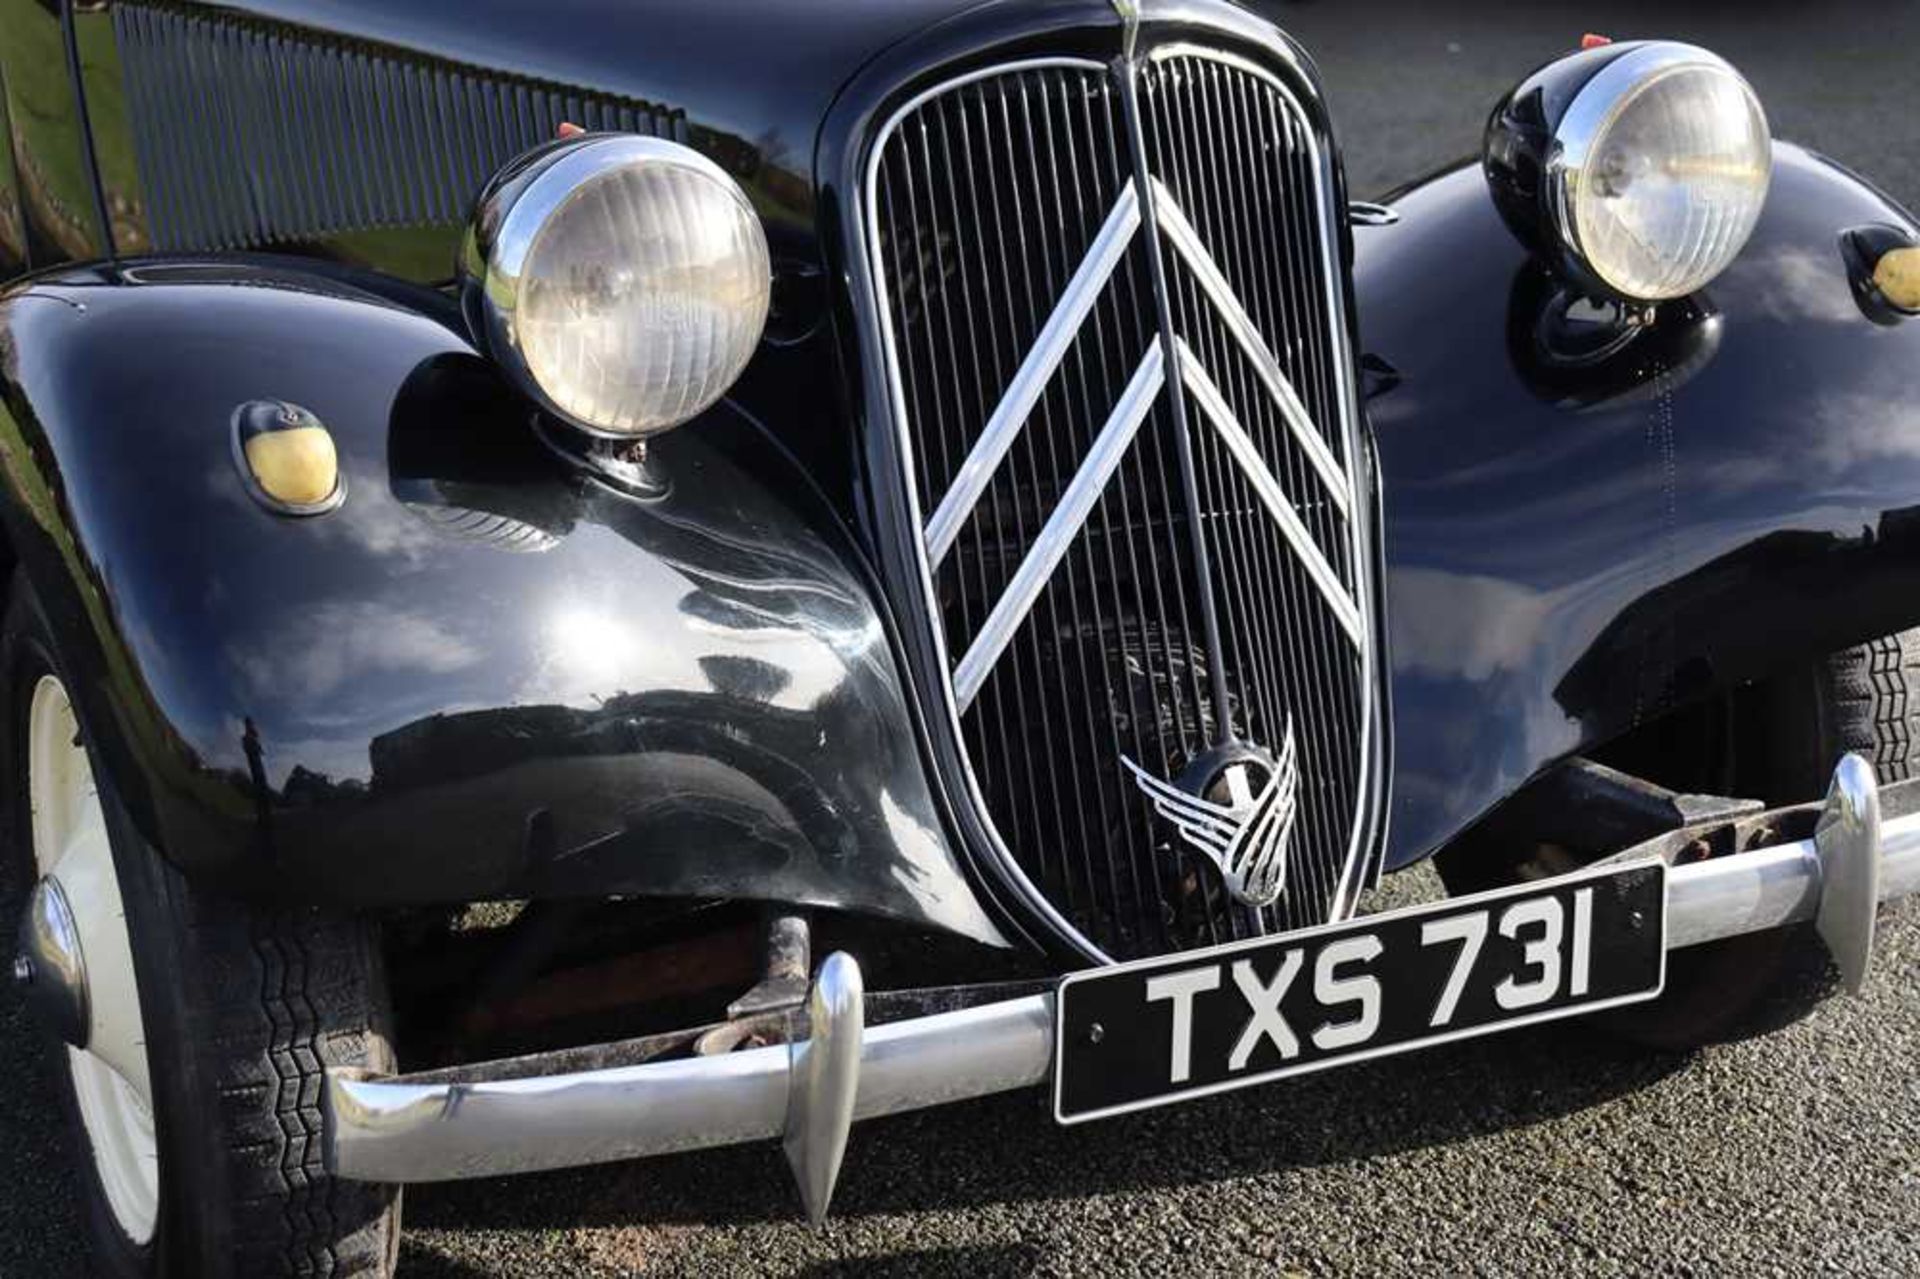 1952 Citroën 11BL Traction Avant In current ownership for over 40 years - Image 18 of 60